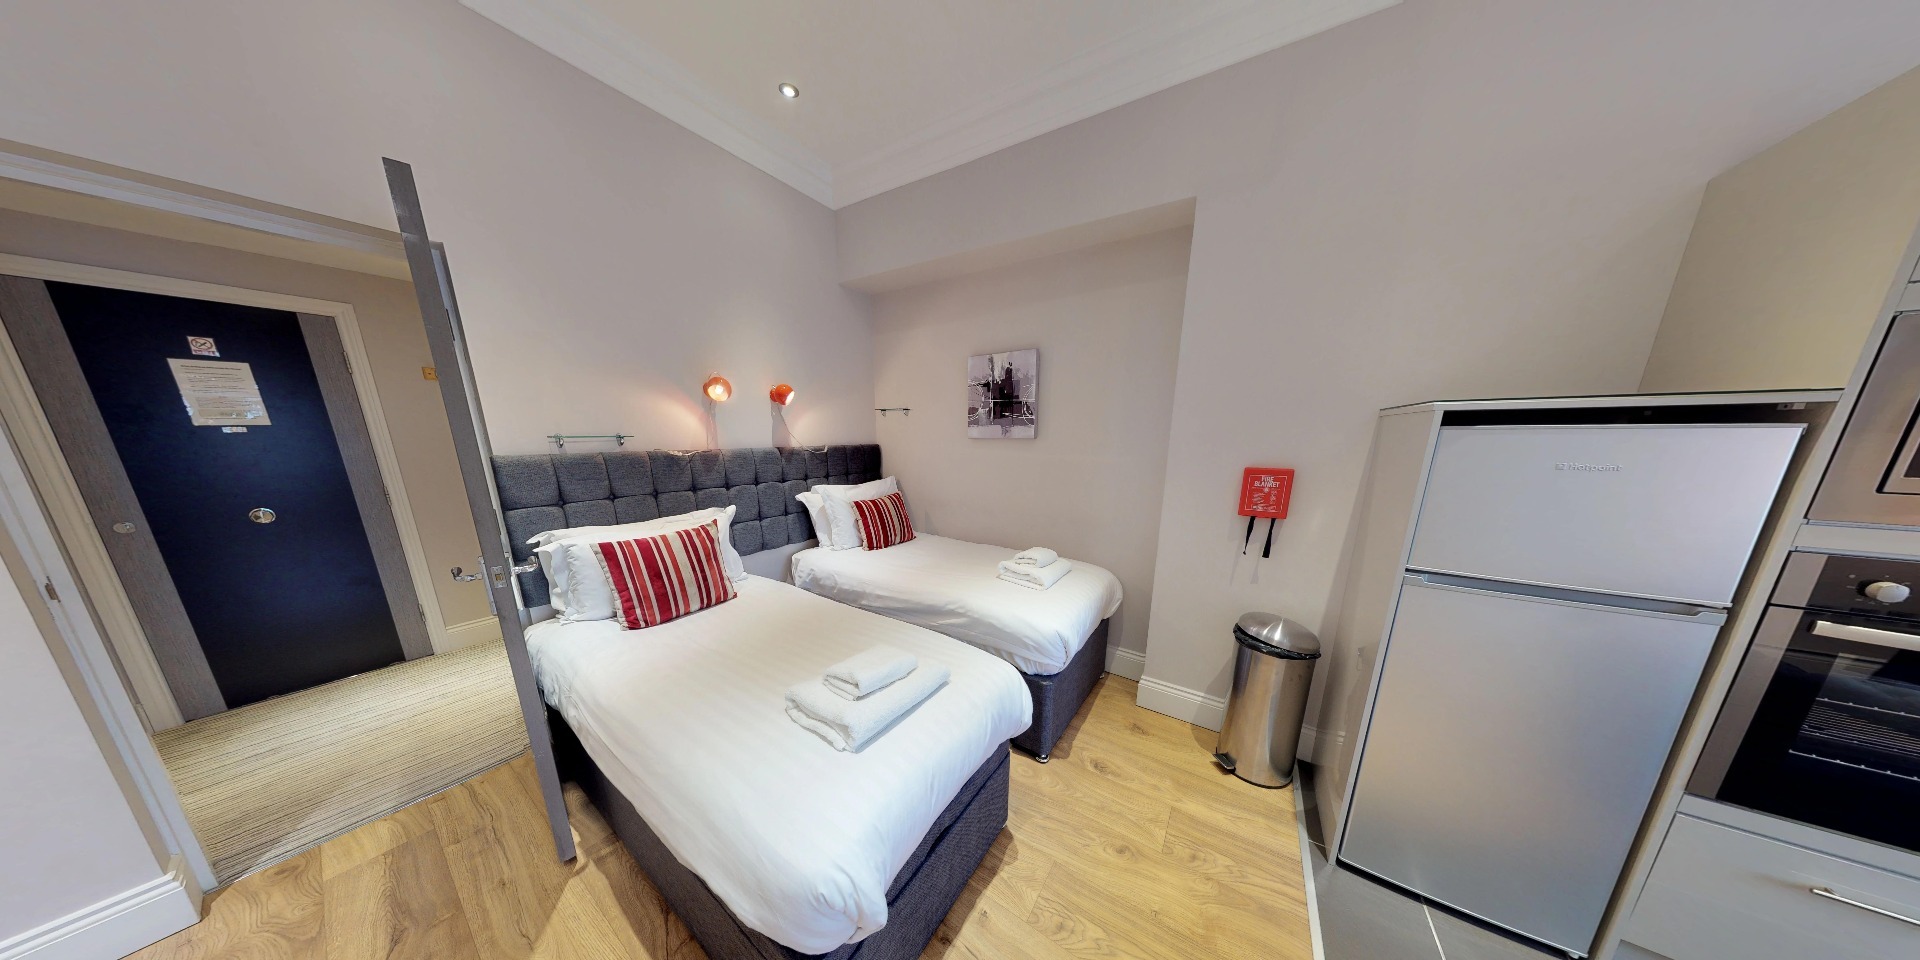 Harrogate Lifestyle offers stylish Studio one bathroom apartment for 1 or 2 people with double or twin bed set up facility. For Bookings Call now - 01423 568820